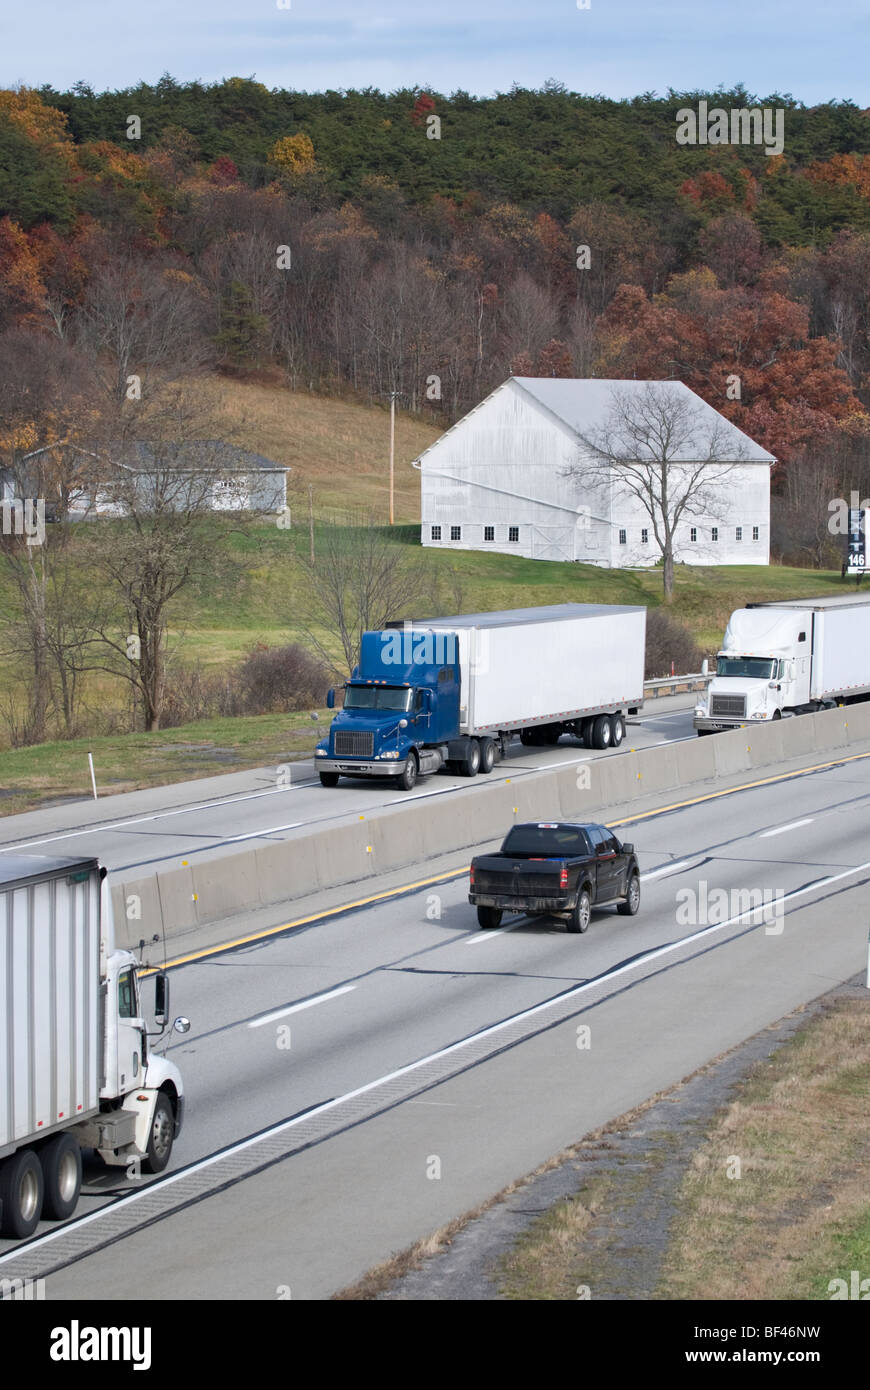 Tractor trailer truck traffic on an American interstate road, the Pennsylvania Turnpike. Stock Photo